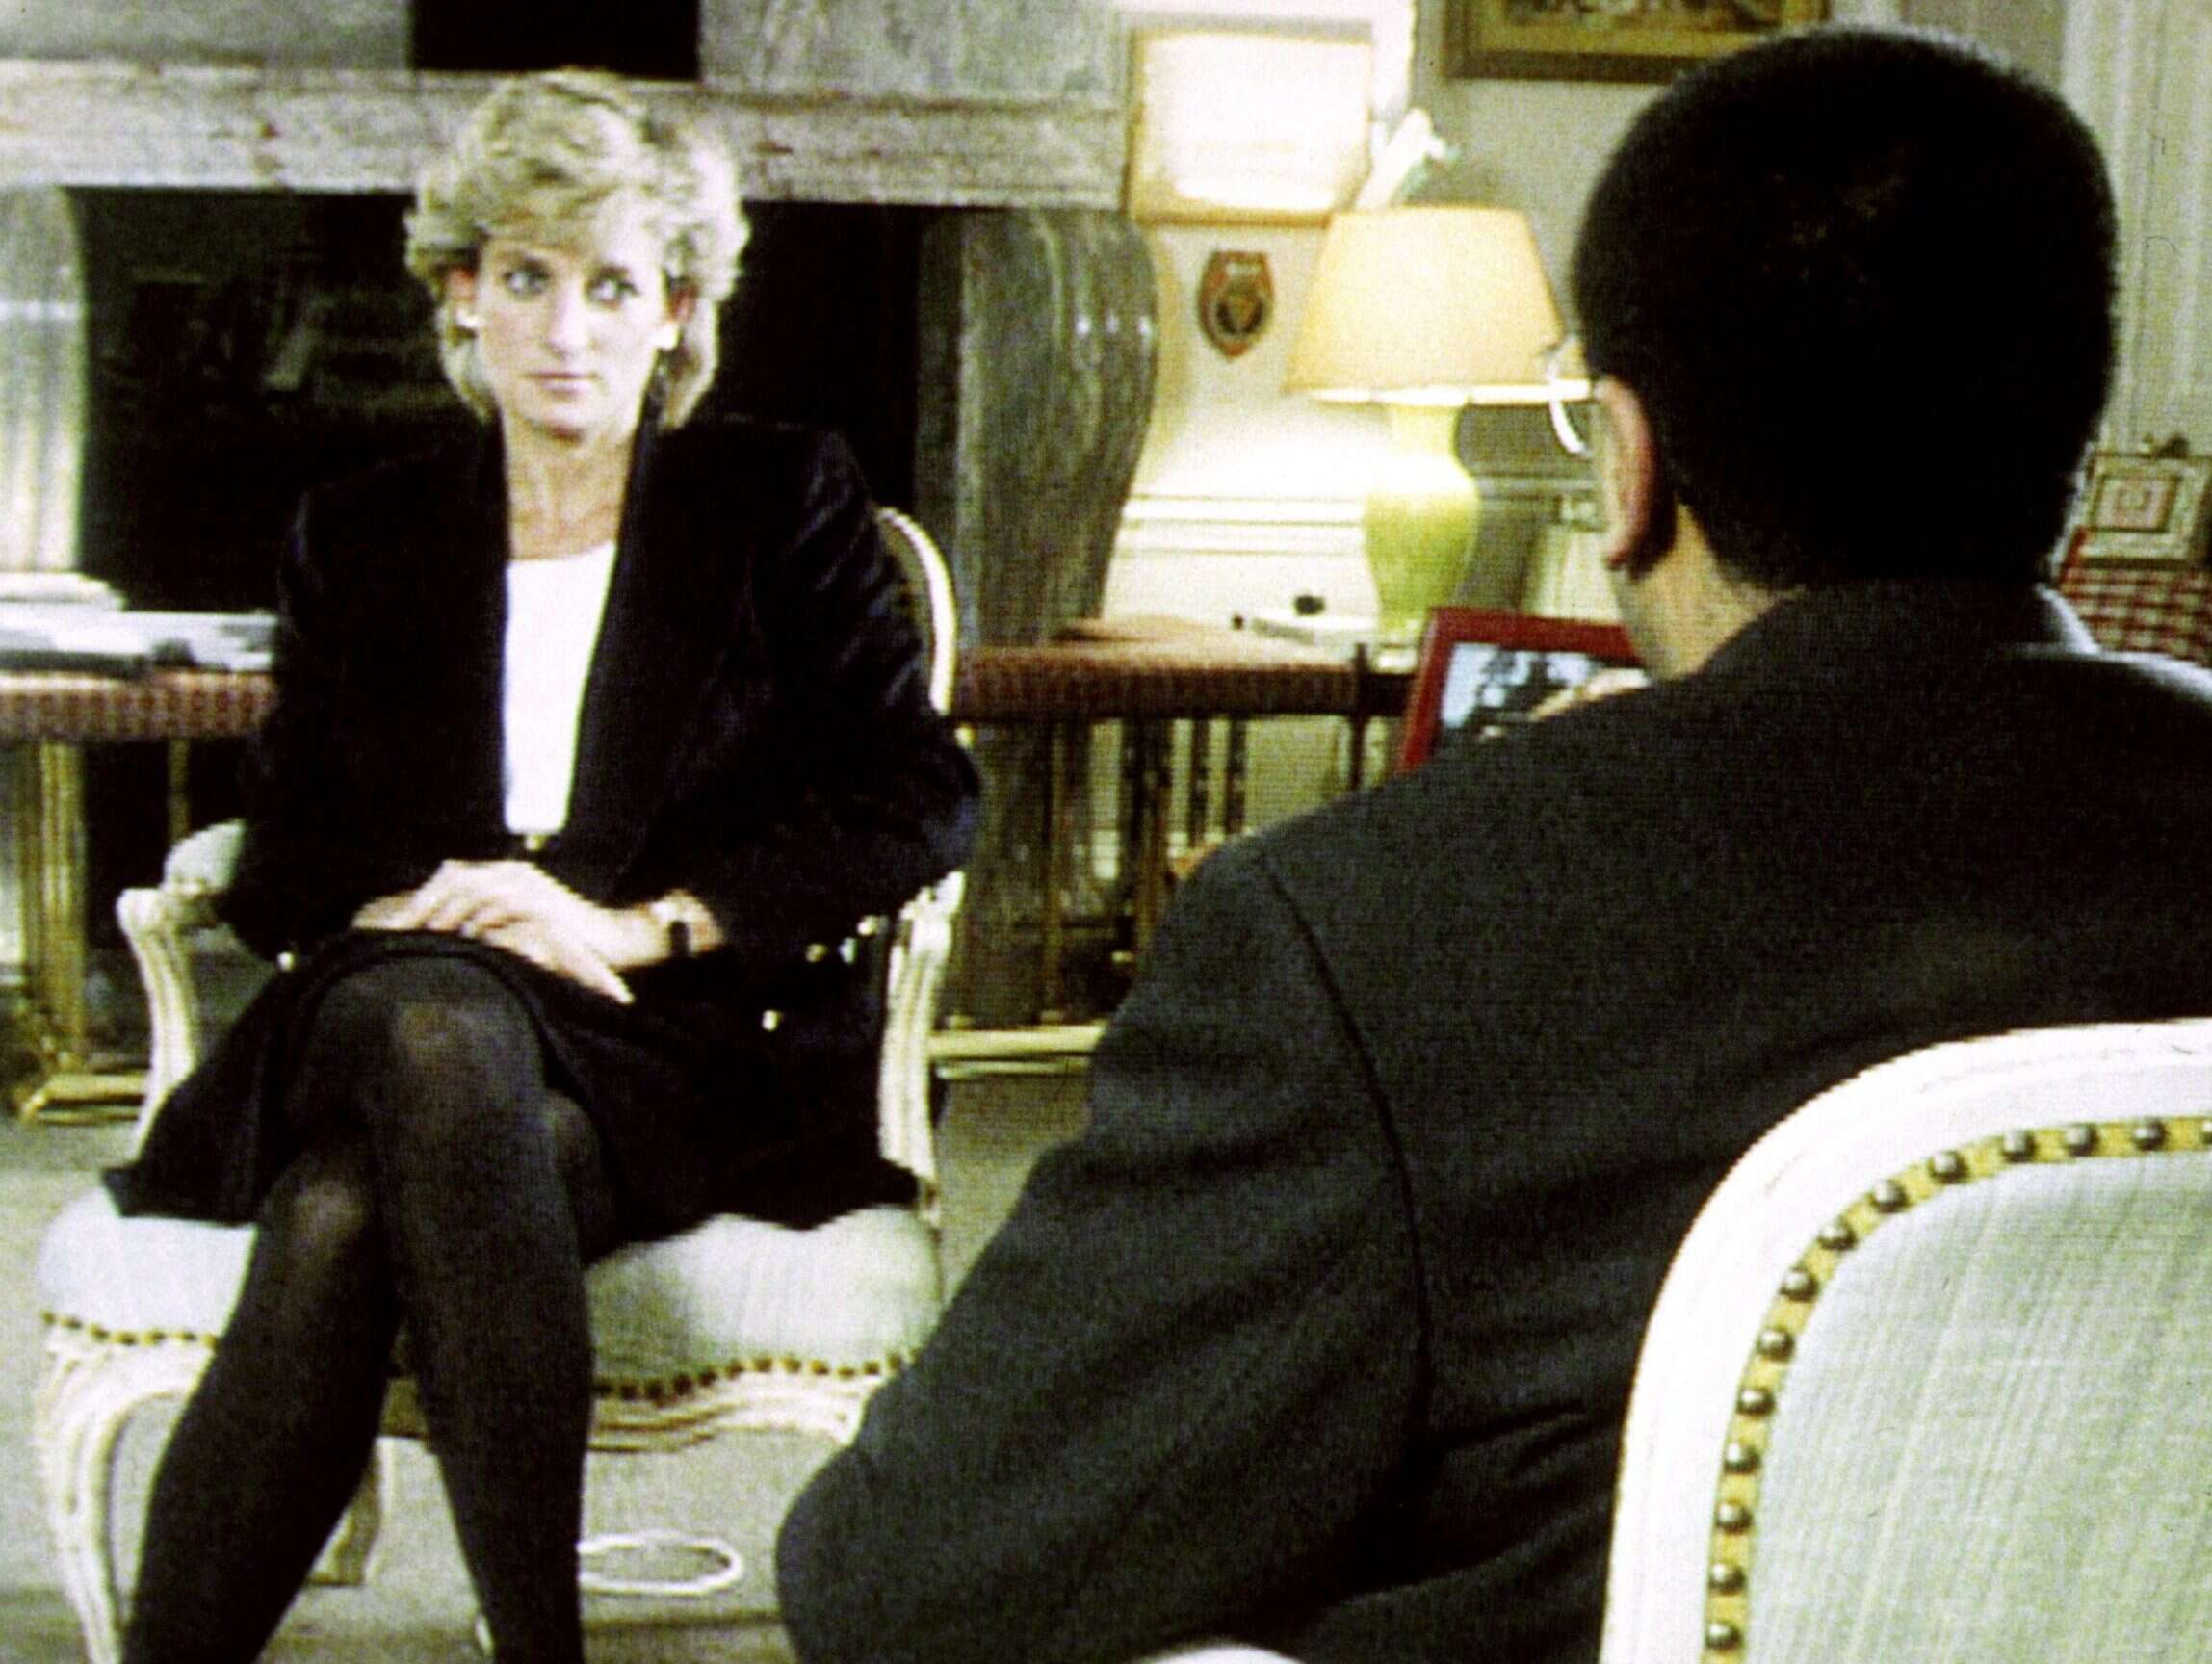 BBC pledges never to air or license Martin Bashir's Princess Diana interview again after latest damages payout